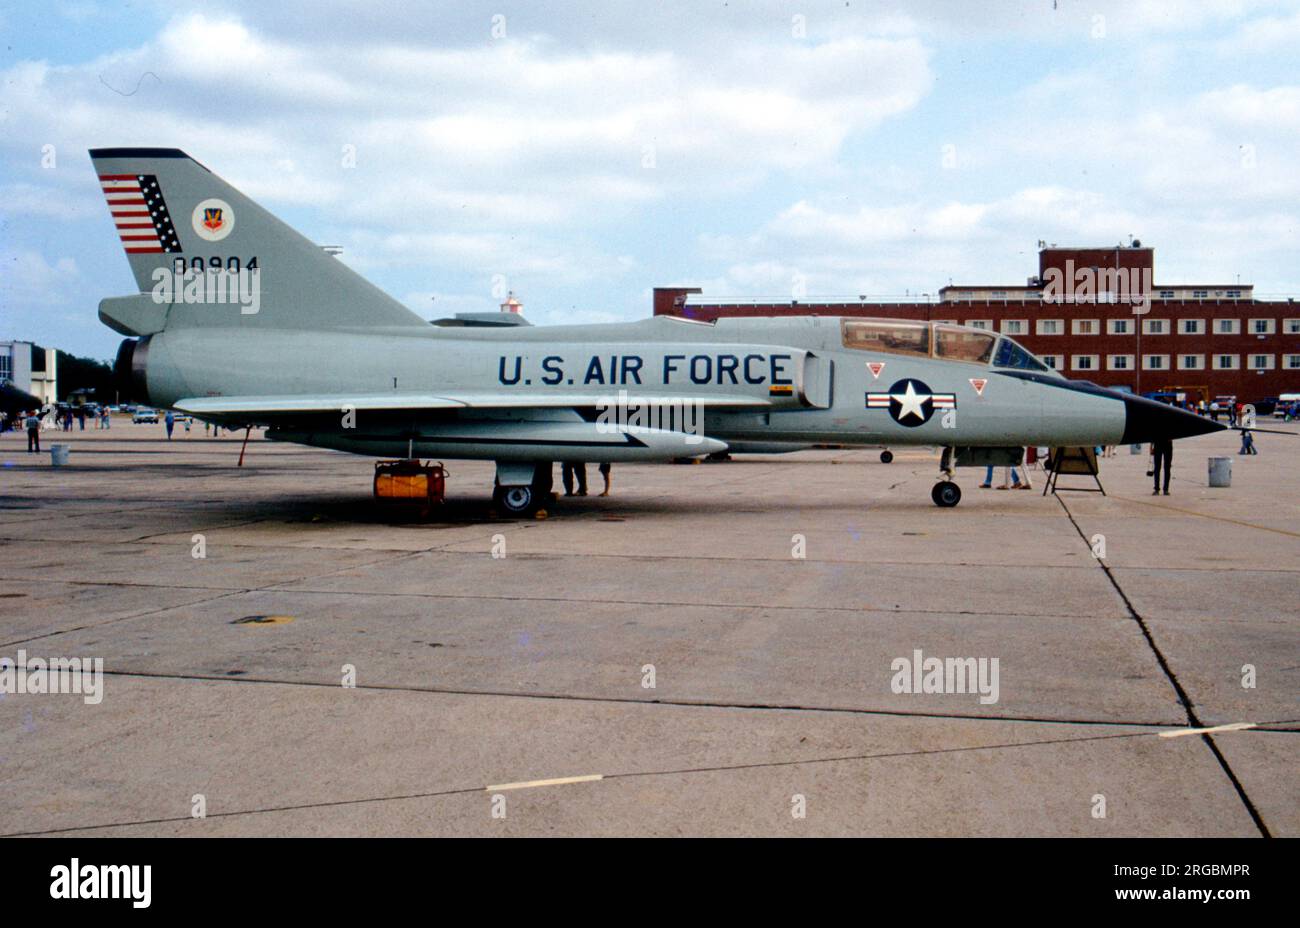 United States Air Force (USAF) - Convair F-106B-65-CO Delta Dart 58-0904 (MSN 8-27-46), dell'Air Defence Weapons Center (ADWC), Tyndall AFB, FL. Foto Stock